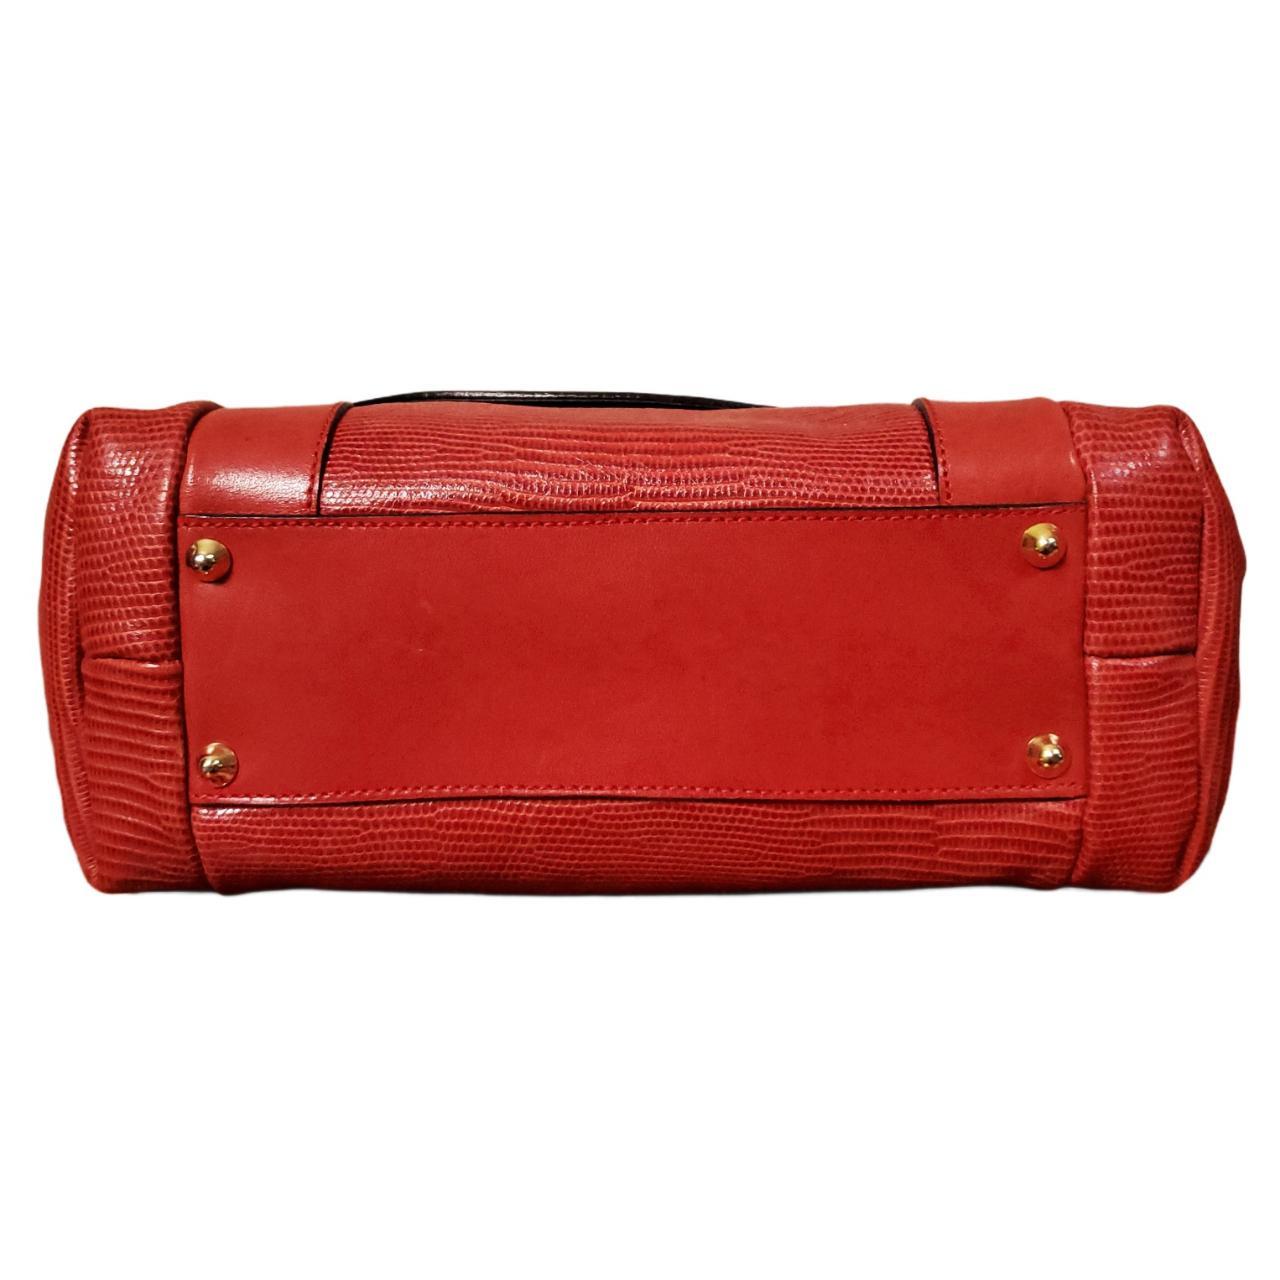 Product Image 3 - Vintage Red Leather Crossbody Bag

Romano